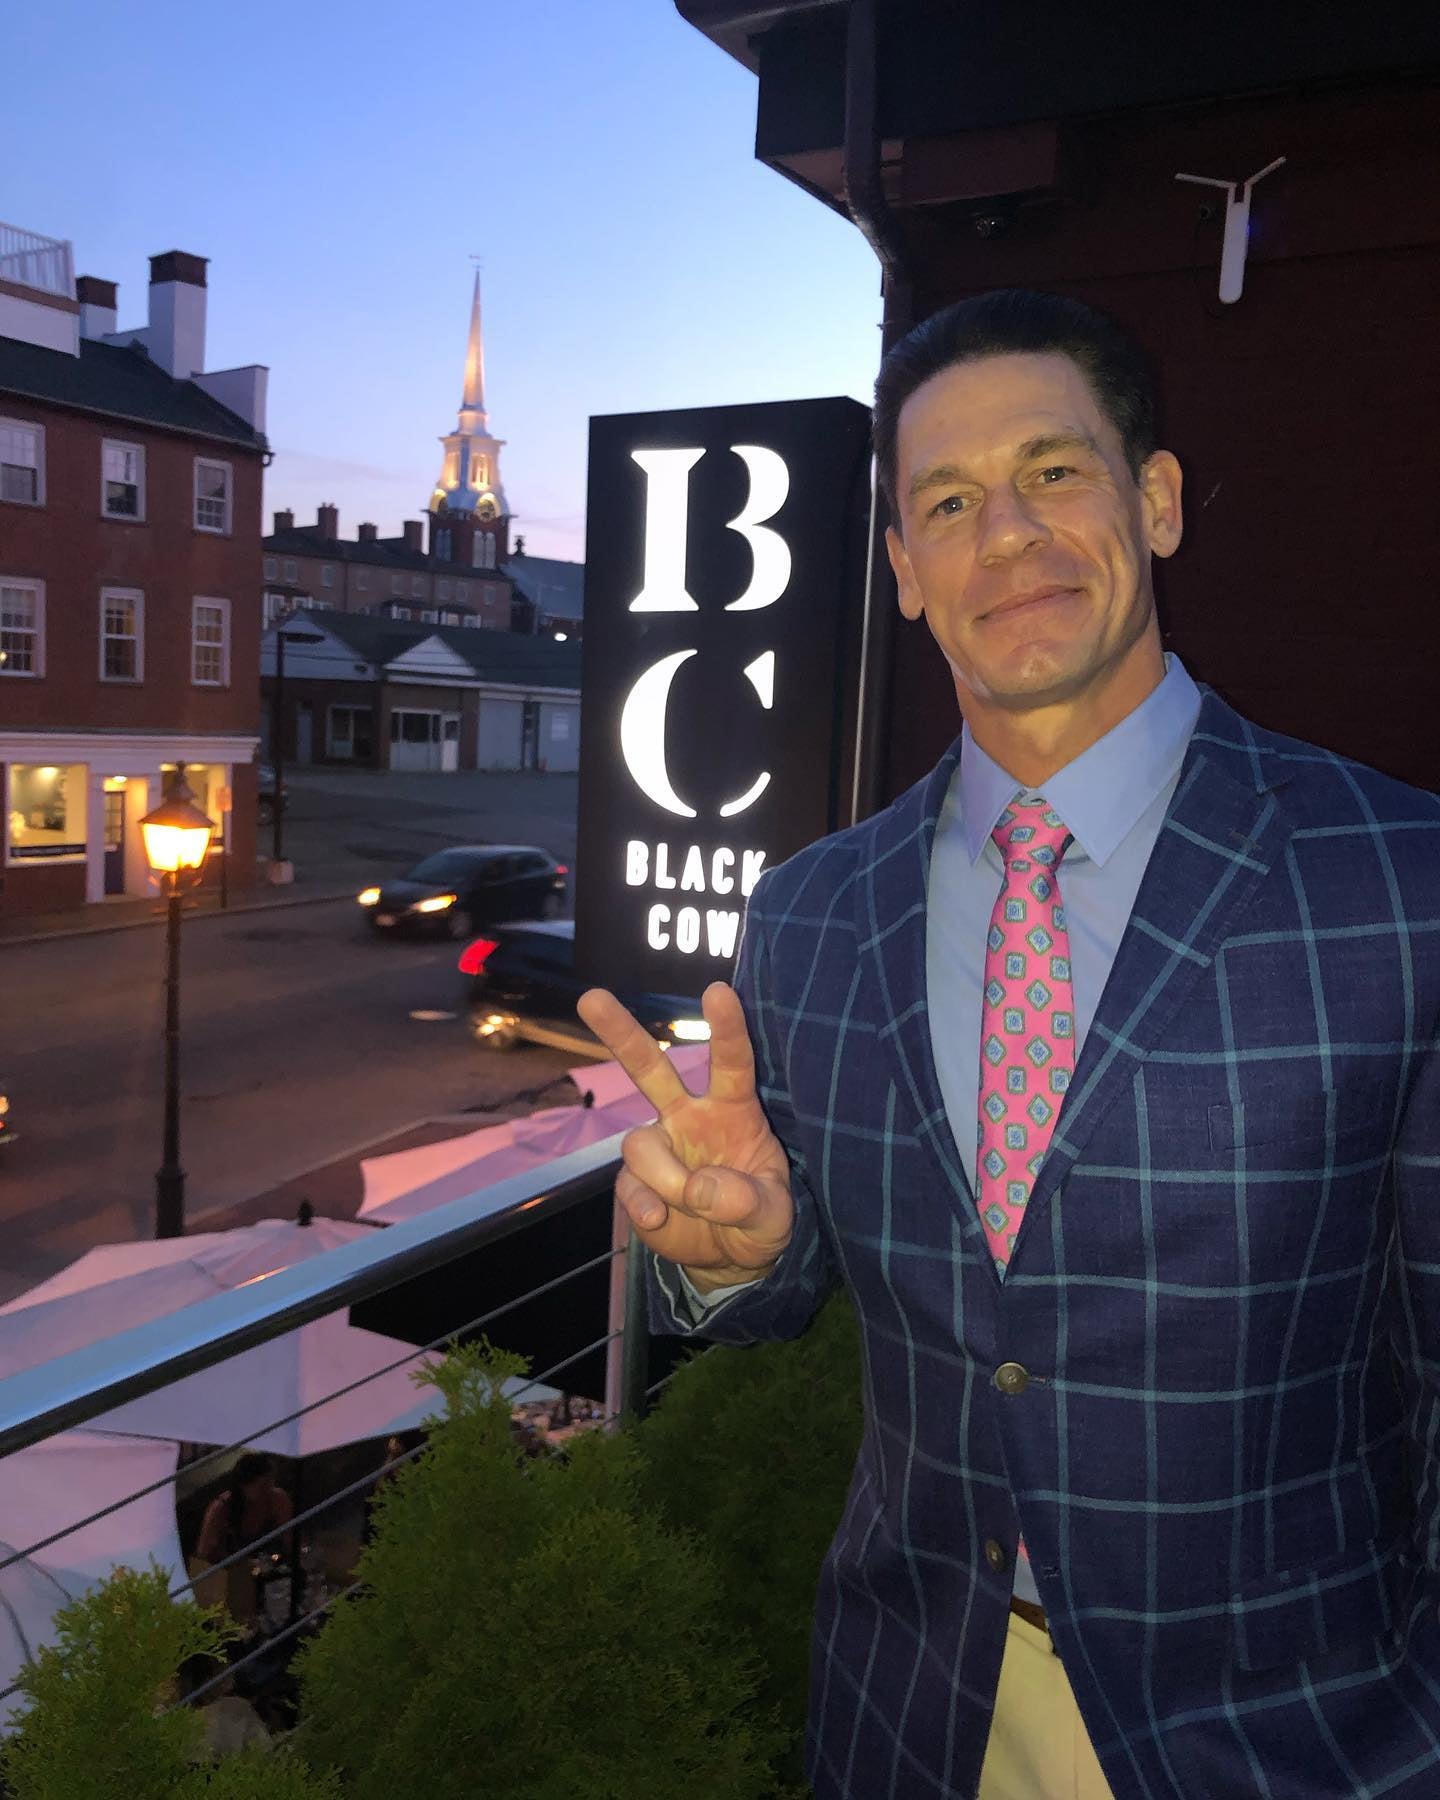 John Cena, wearing a blue plaid jacket, blue dress shirt, and pink tie with blue accents, poses at the Black Cow in Newburyport, Massachusetts.